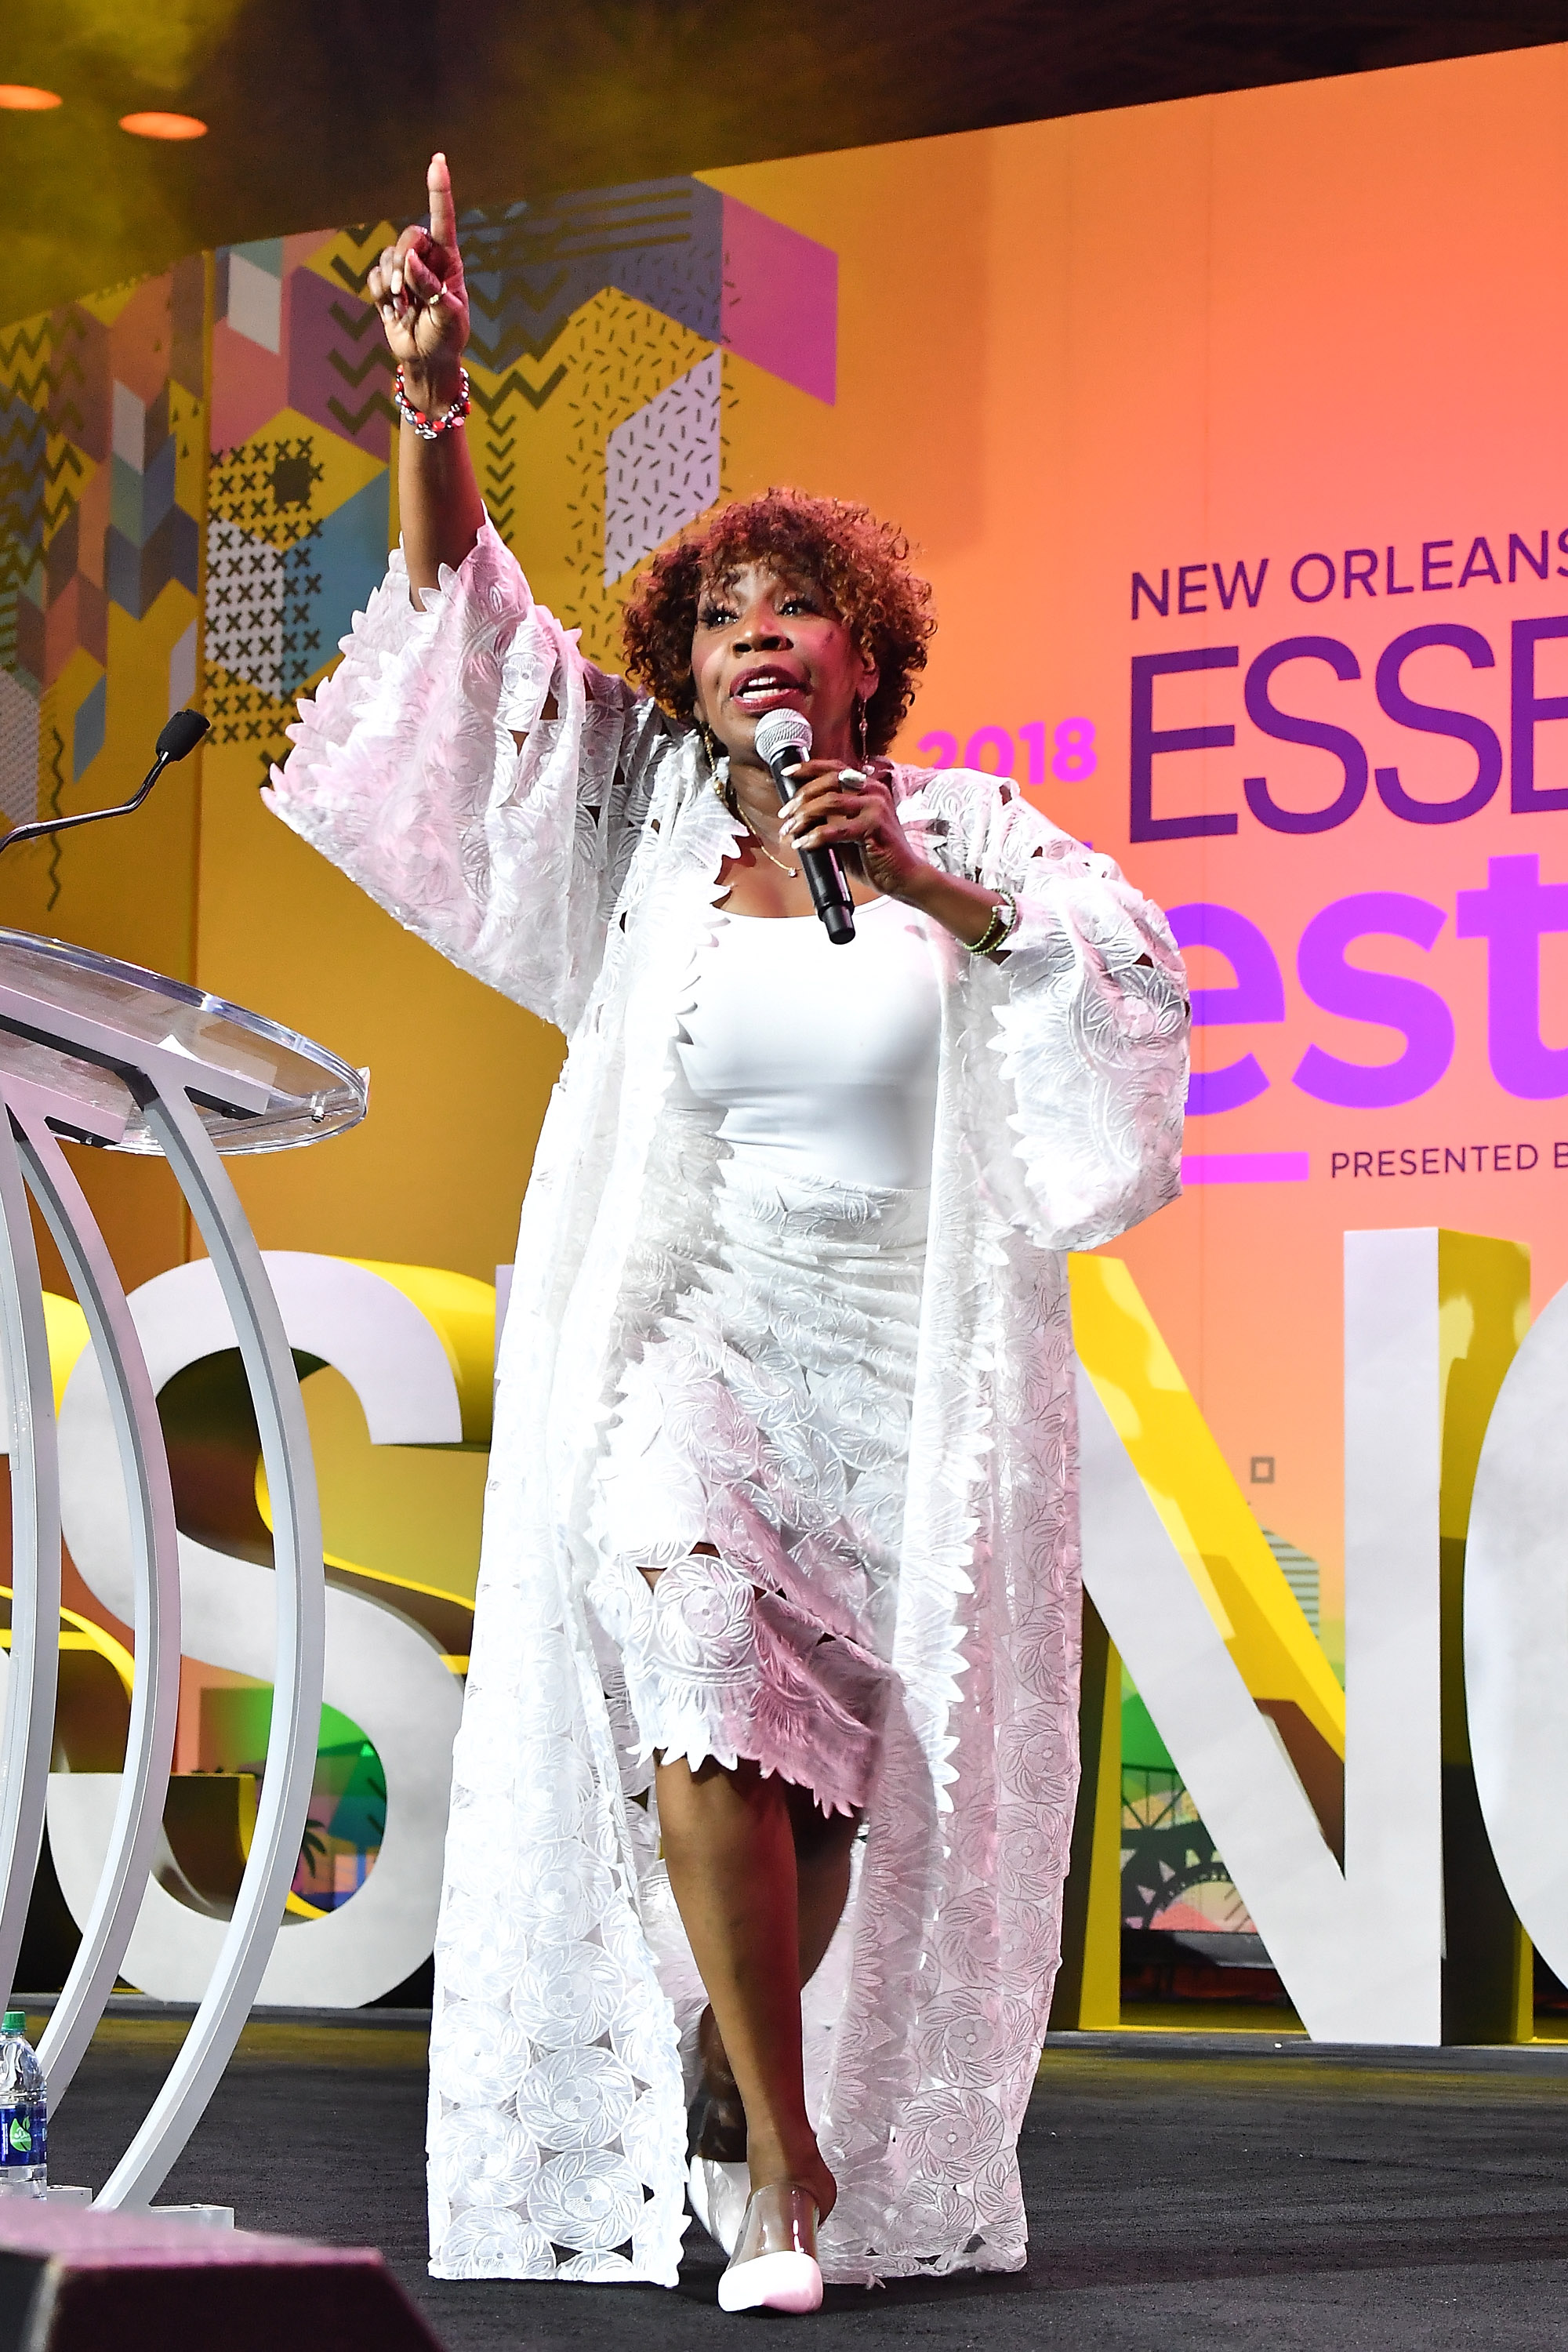 'Girl's Trip' Film Made Essence Fest 2018 The Biggest Year Yet!